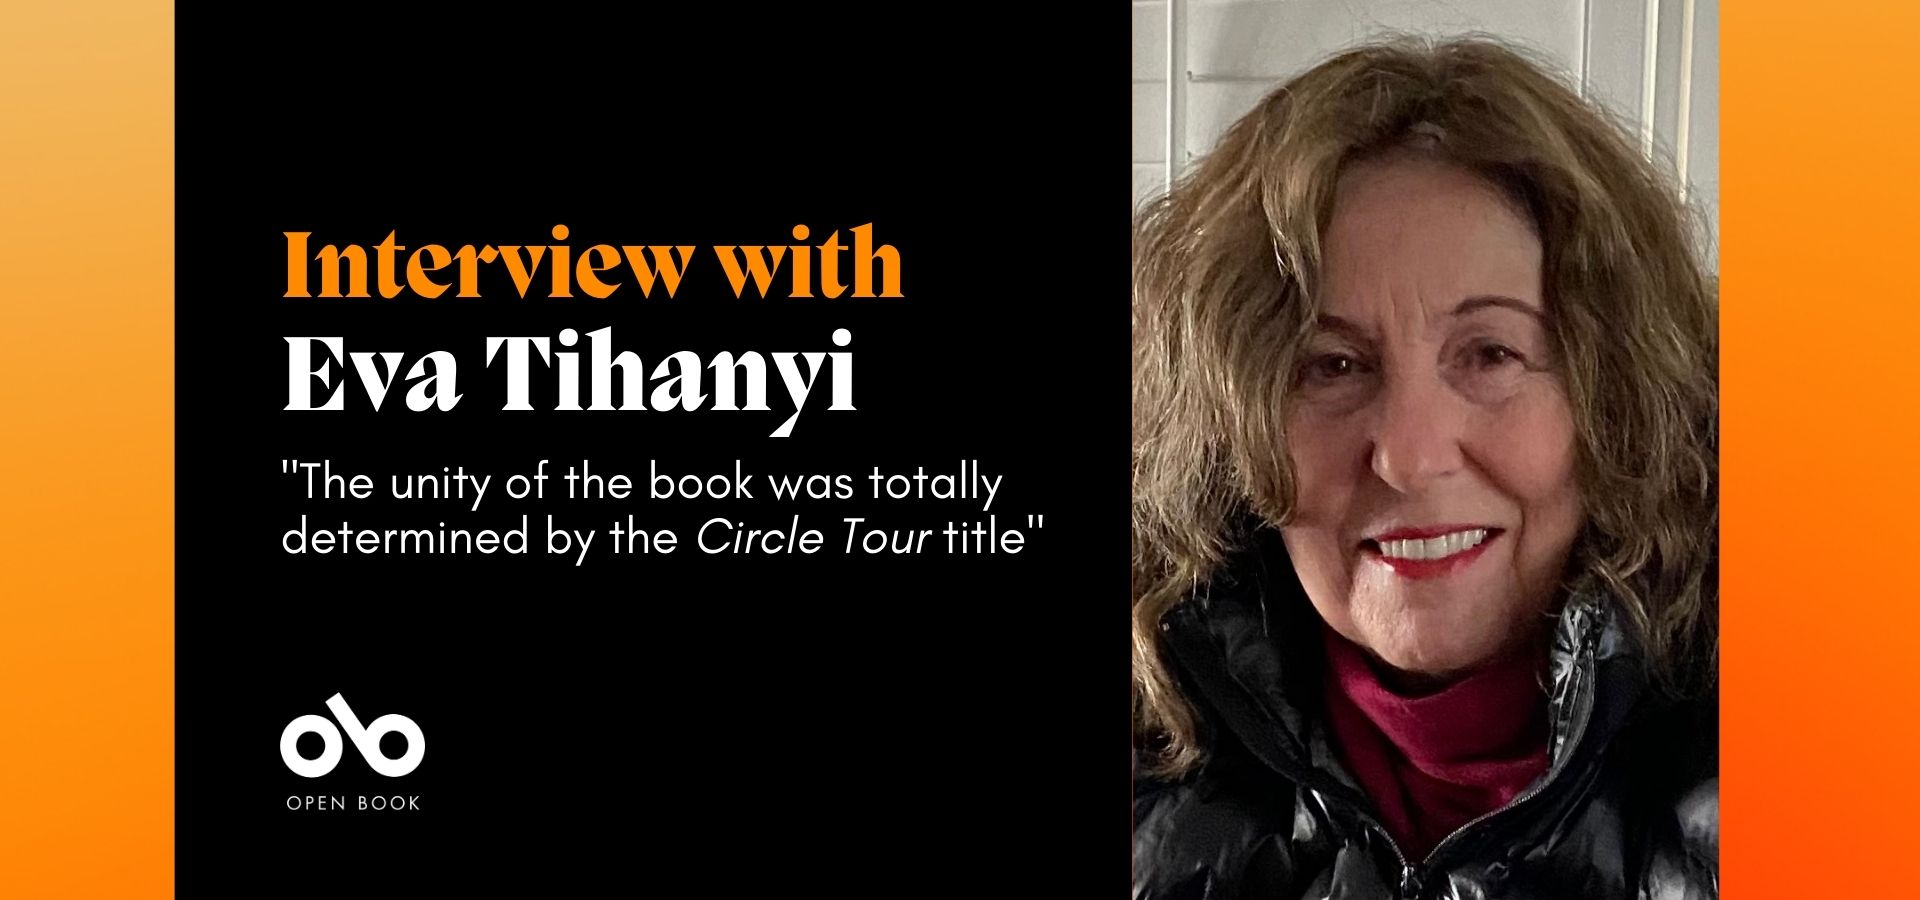 Black and orange banner image with photo of poet Eva Tihanyi and text reading "Interview with Eva Tihanyi. 'The unity of the book was totally determined by the Circle Tour title'" Open Book logo bottom left